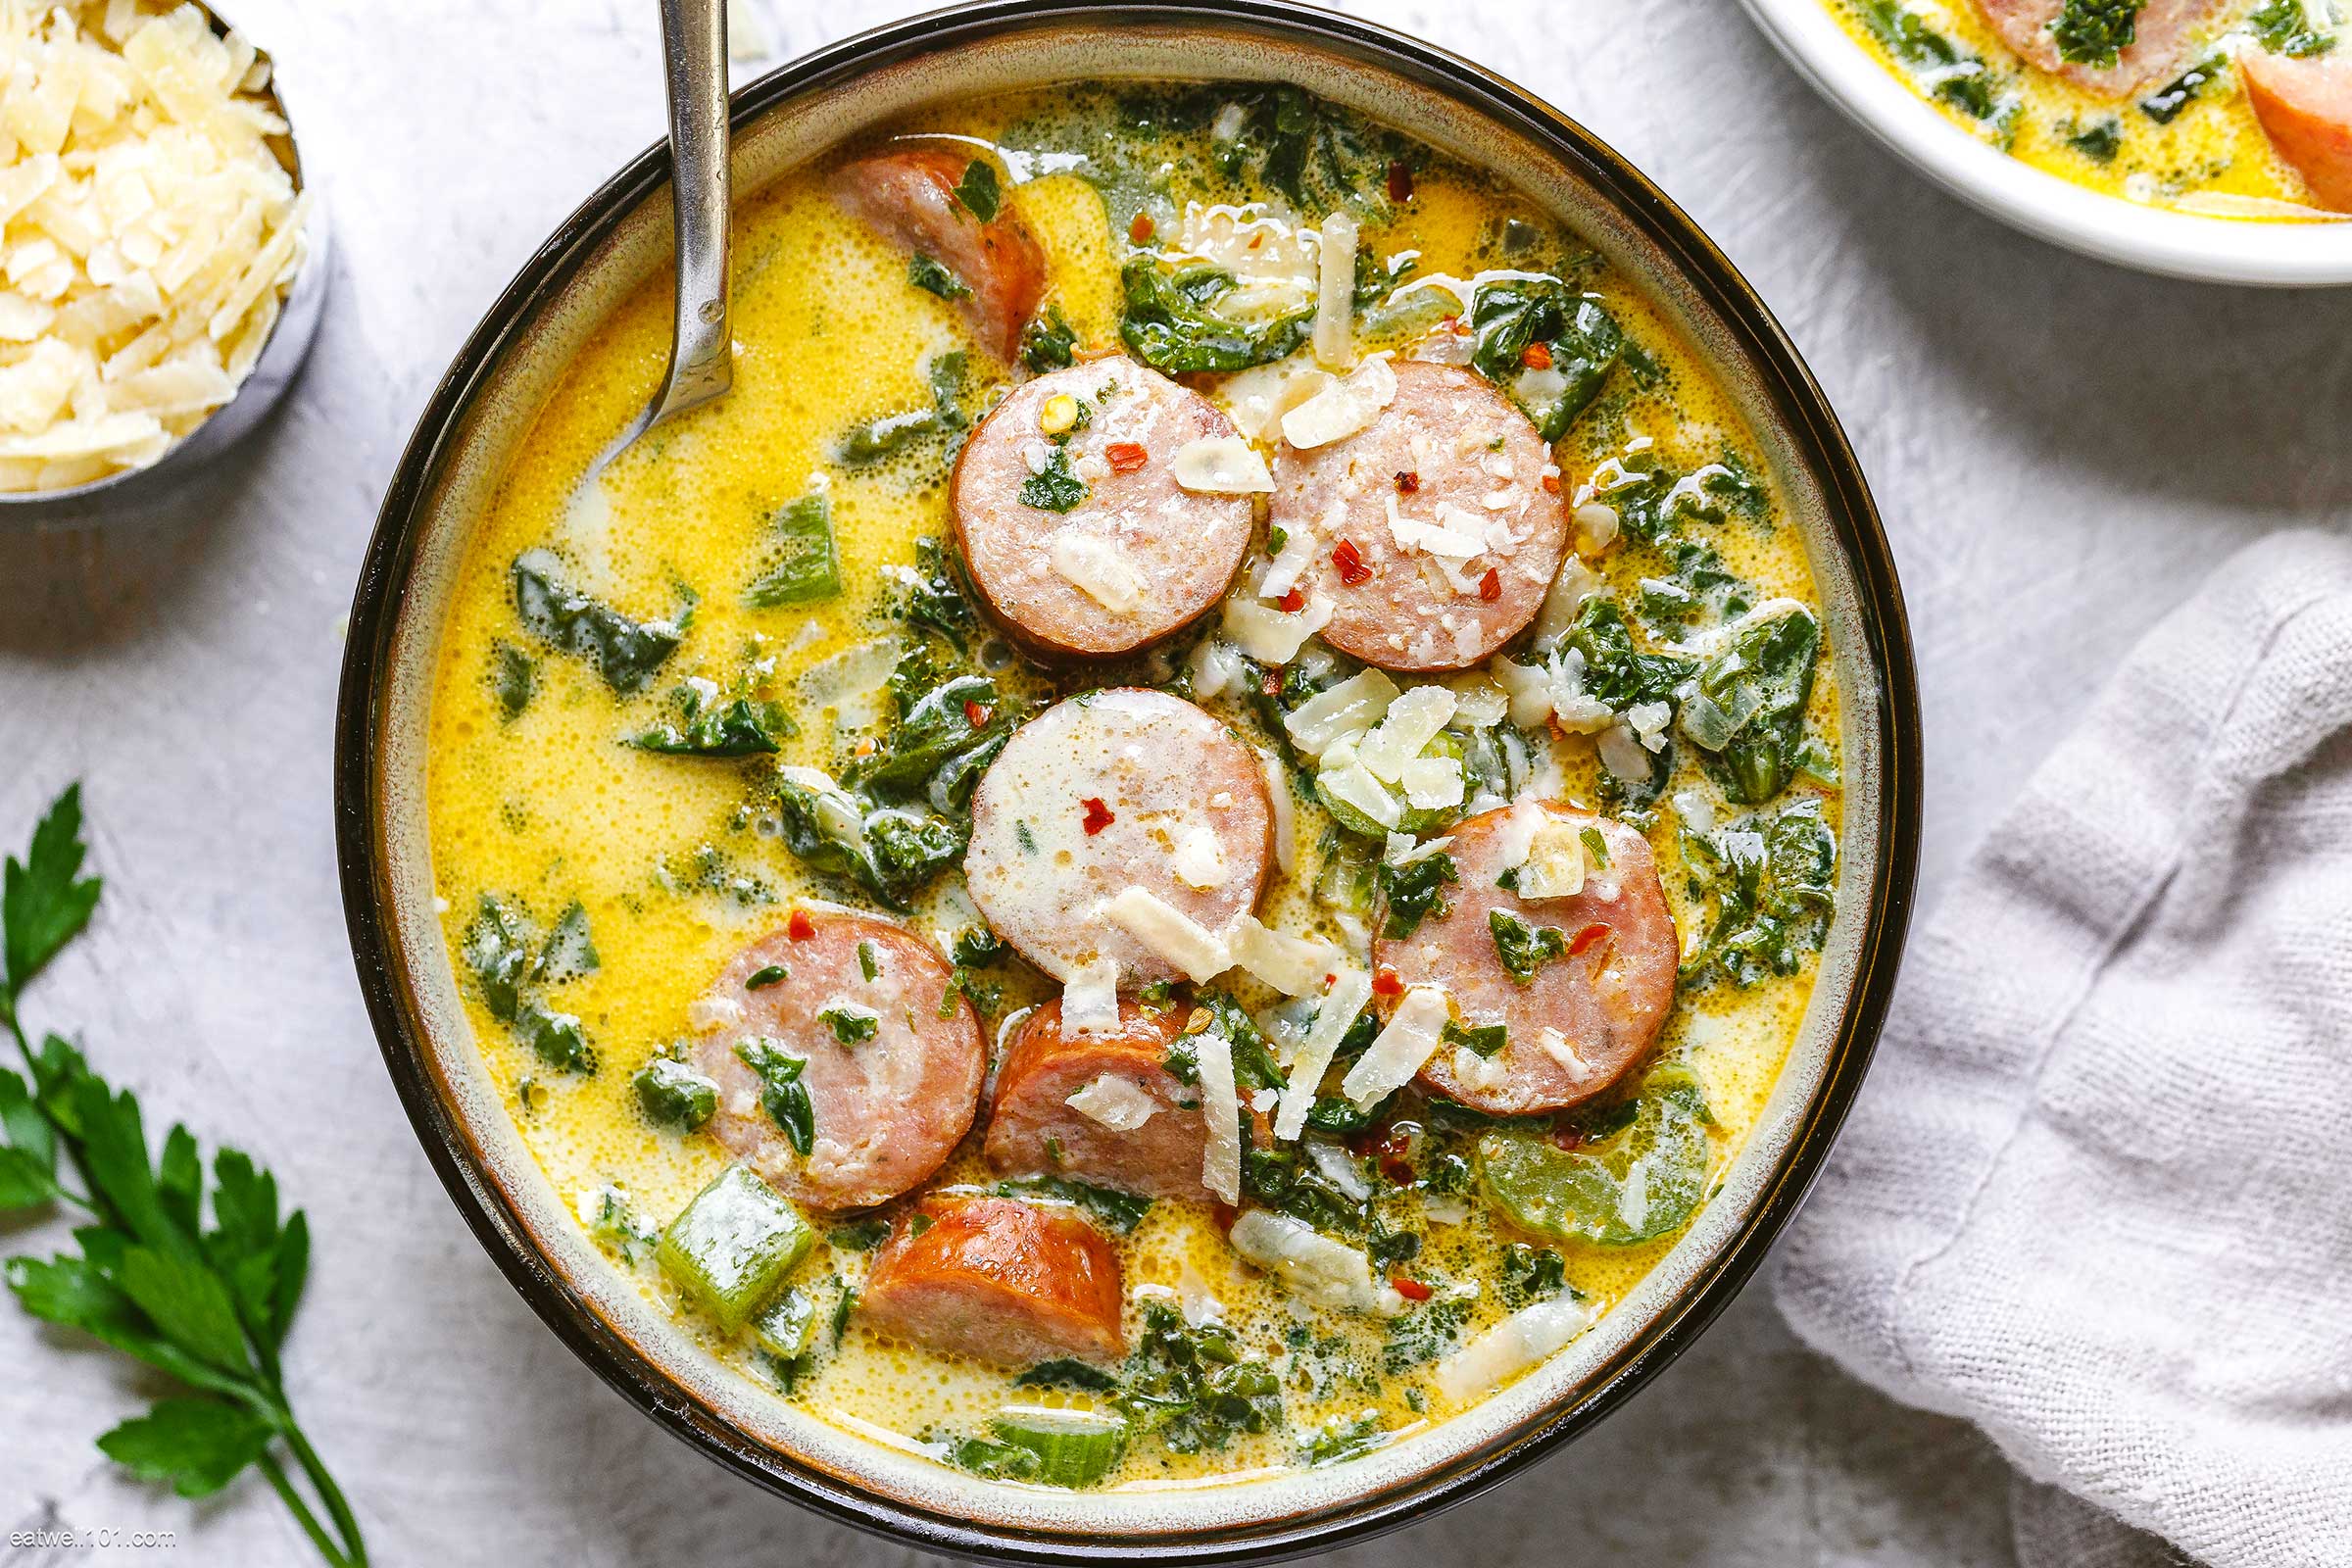 Creamy Sausage Soup With Green Vegetables